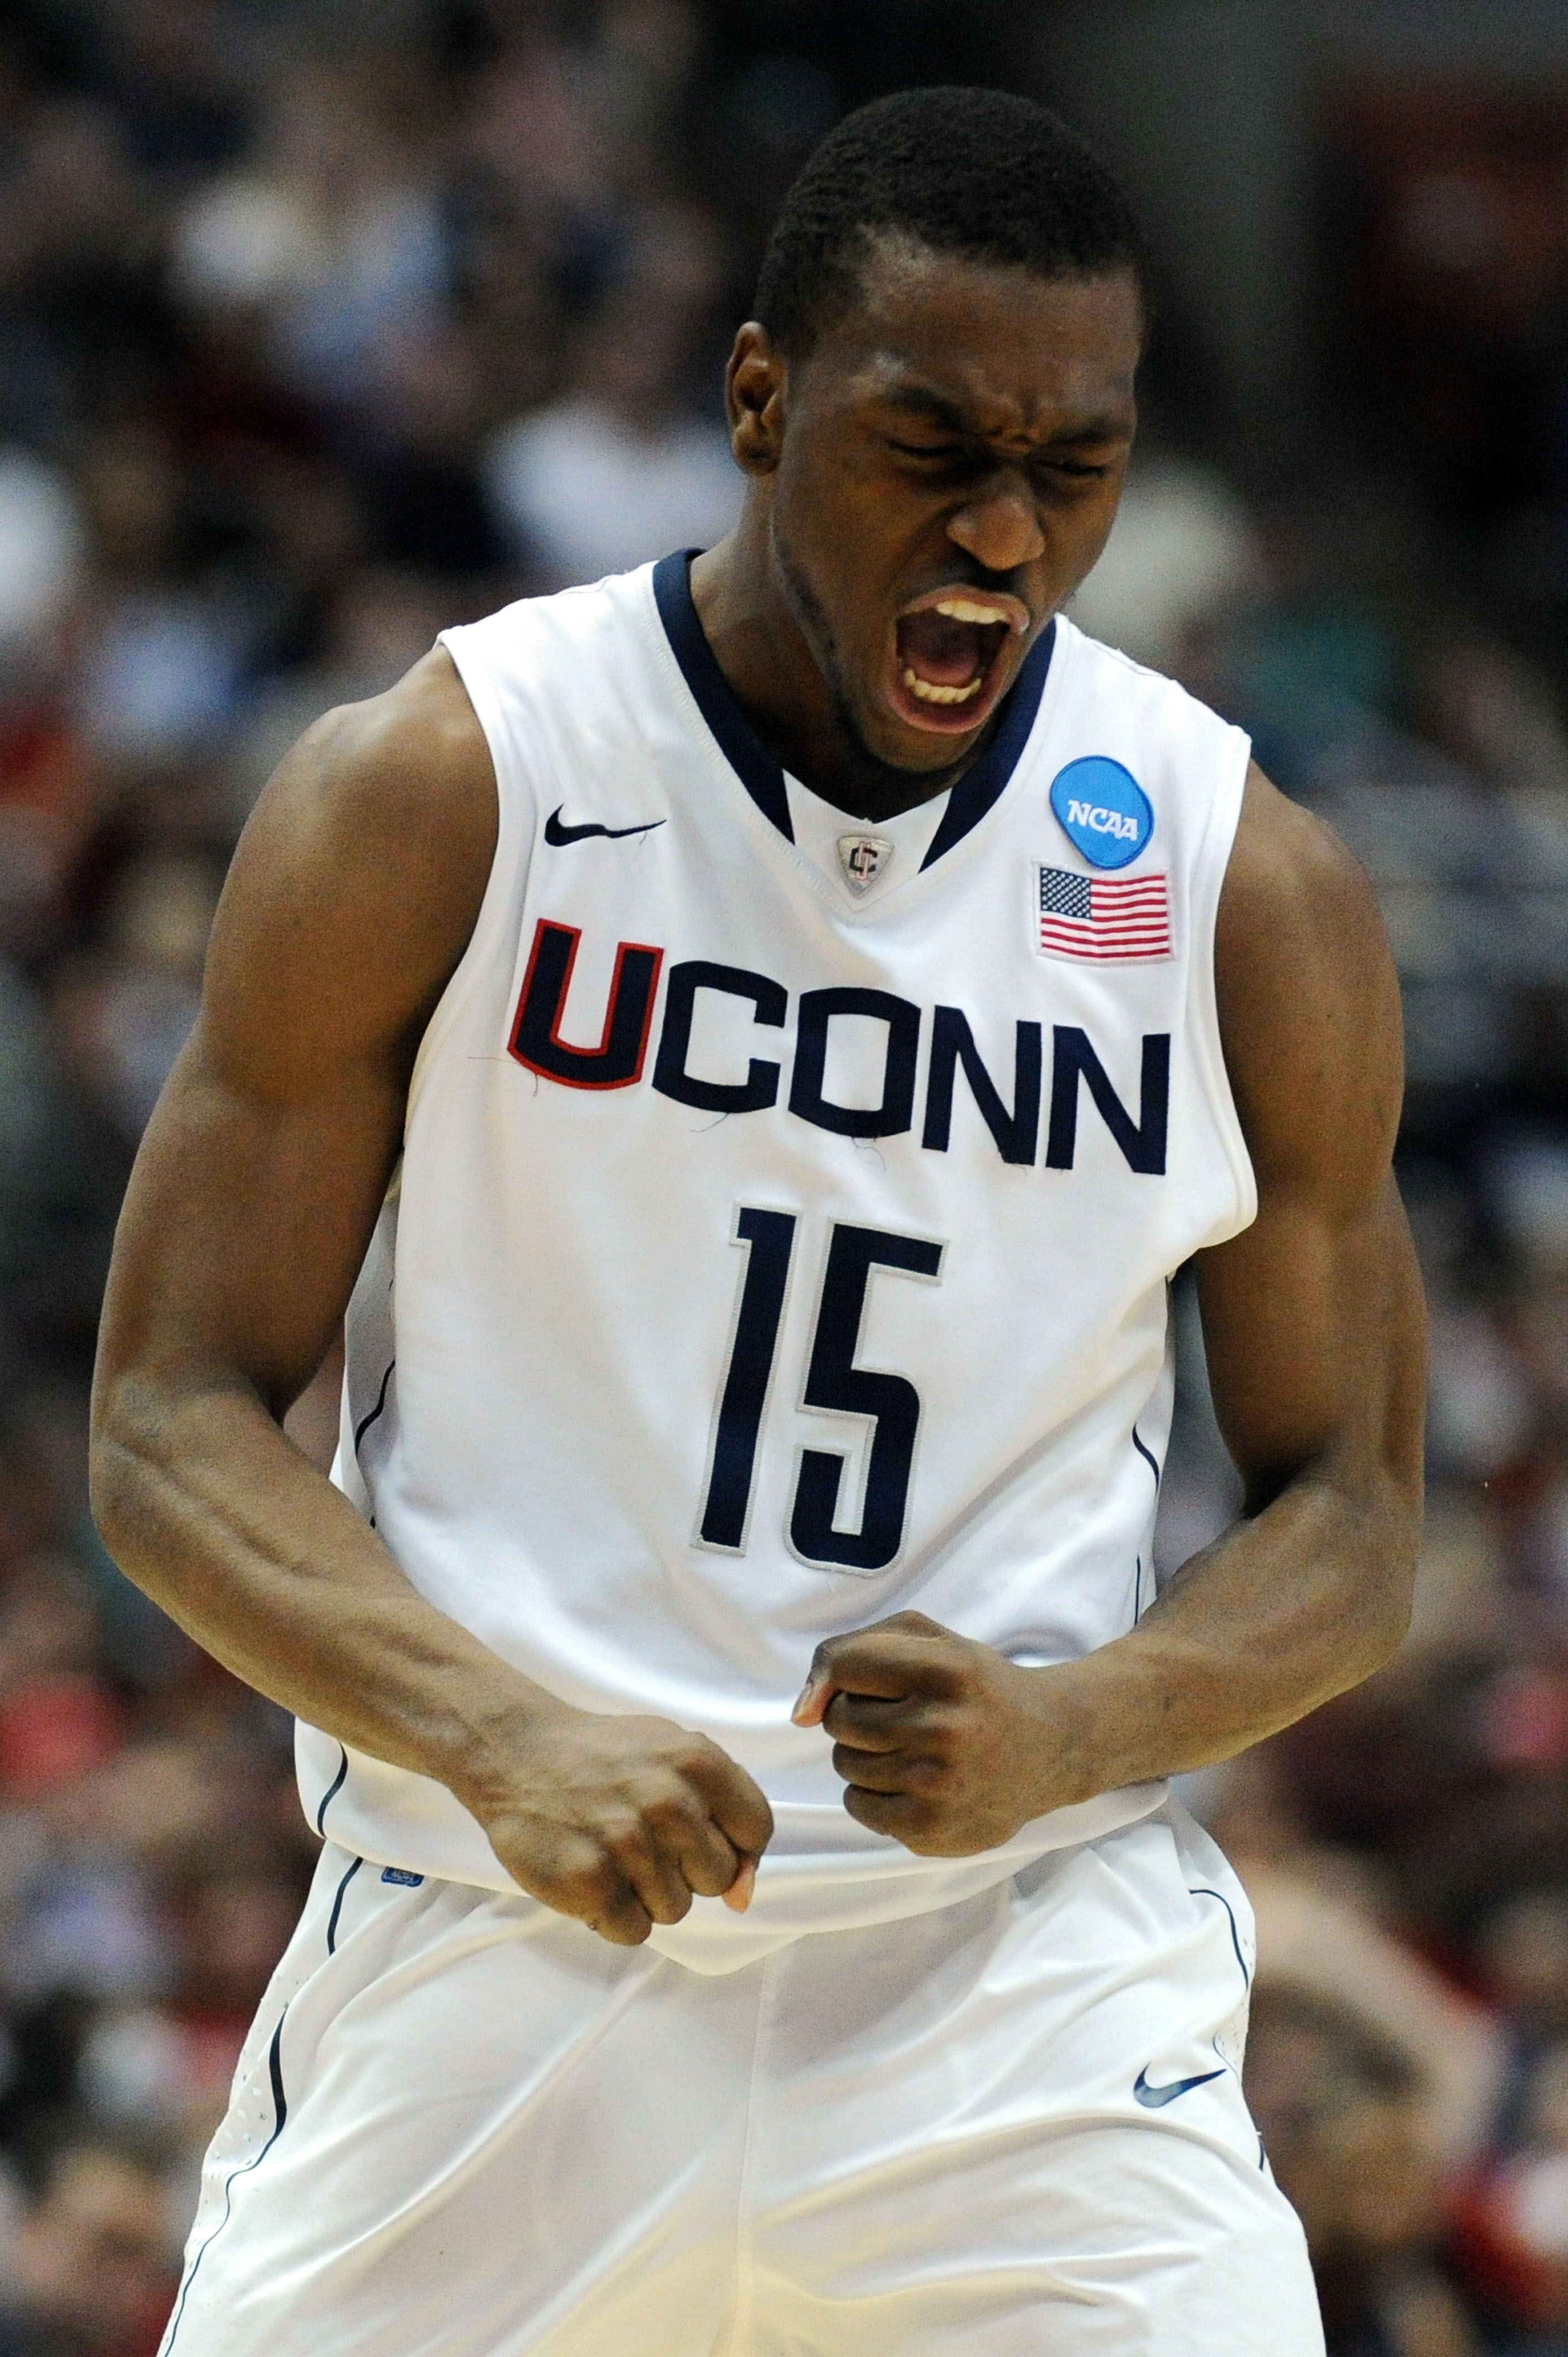 ANAHEIM, CA - MARCH 26:  Kemba Walker #15 of the Connecticut Huskies celebrates after a play towards the end of the game against the Arizona Wildcats during the west regional final of the 2011 NCAA men's basketball tournament at the Honda Center on March